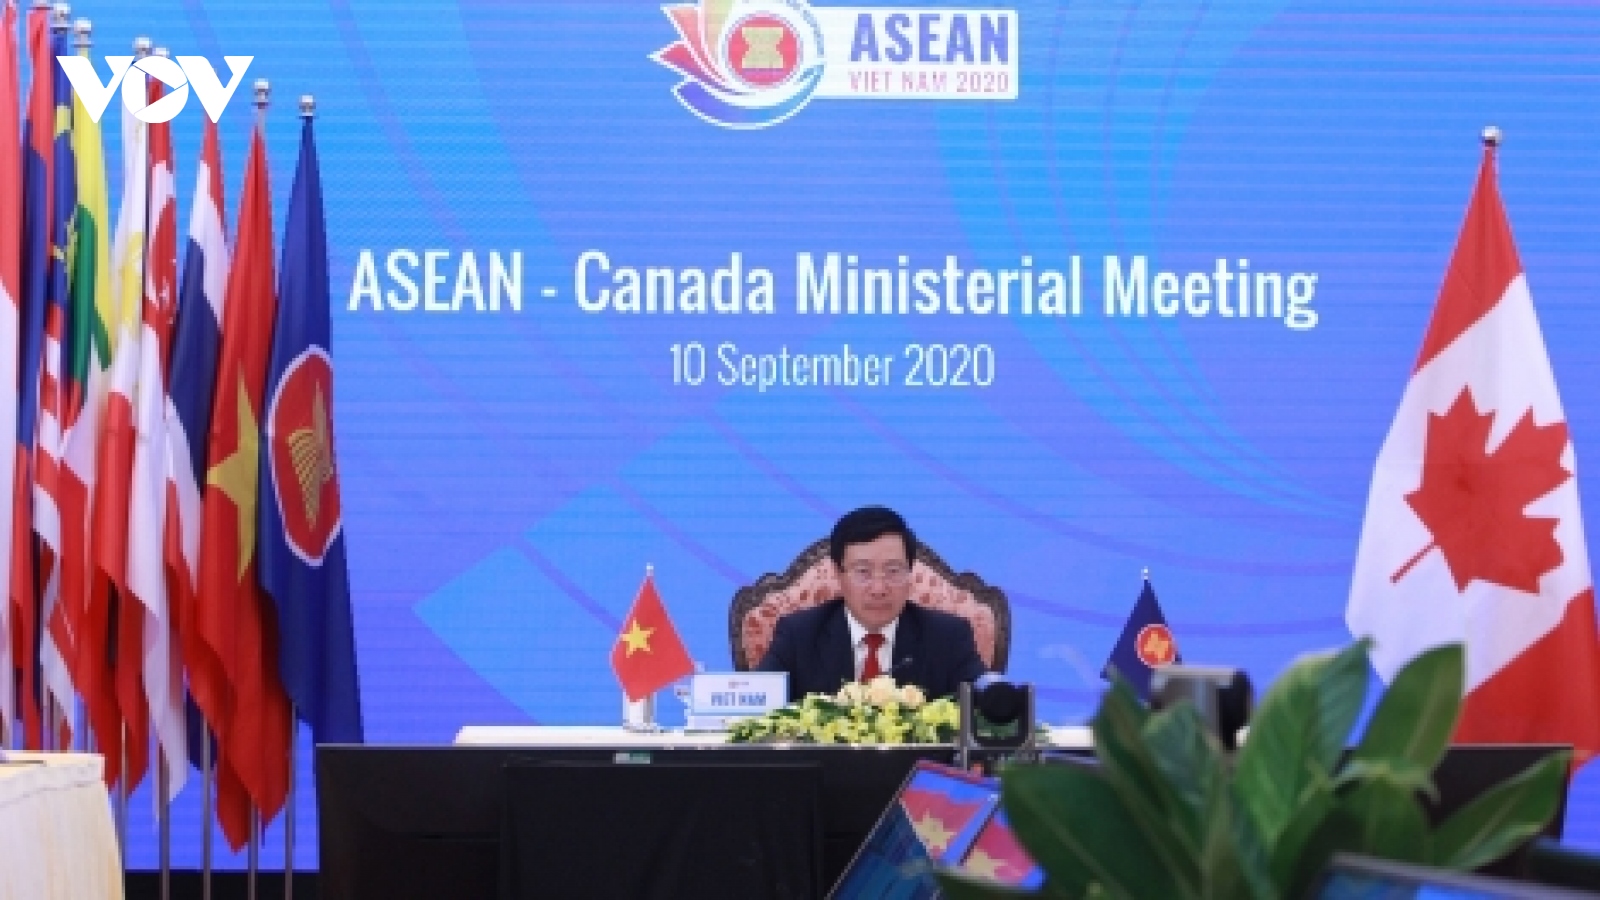 Canadian expert greatly values Vietnamese role as ASEAN Chair